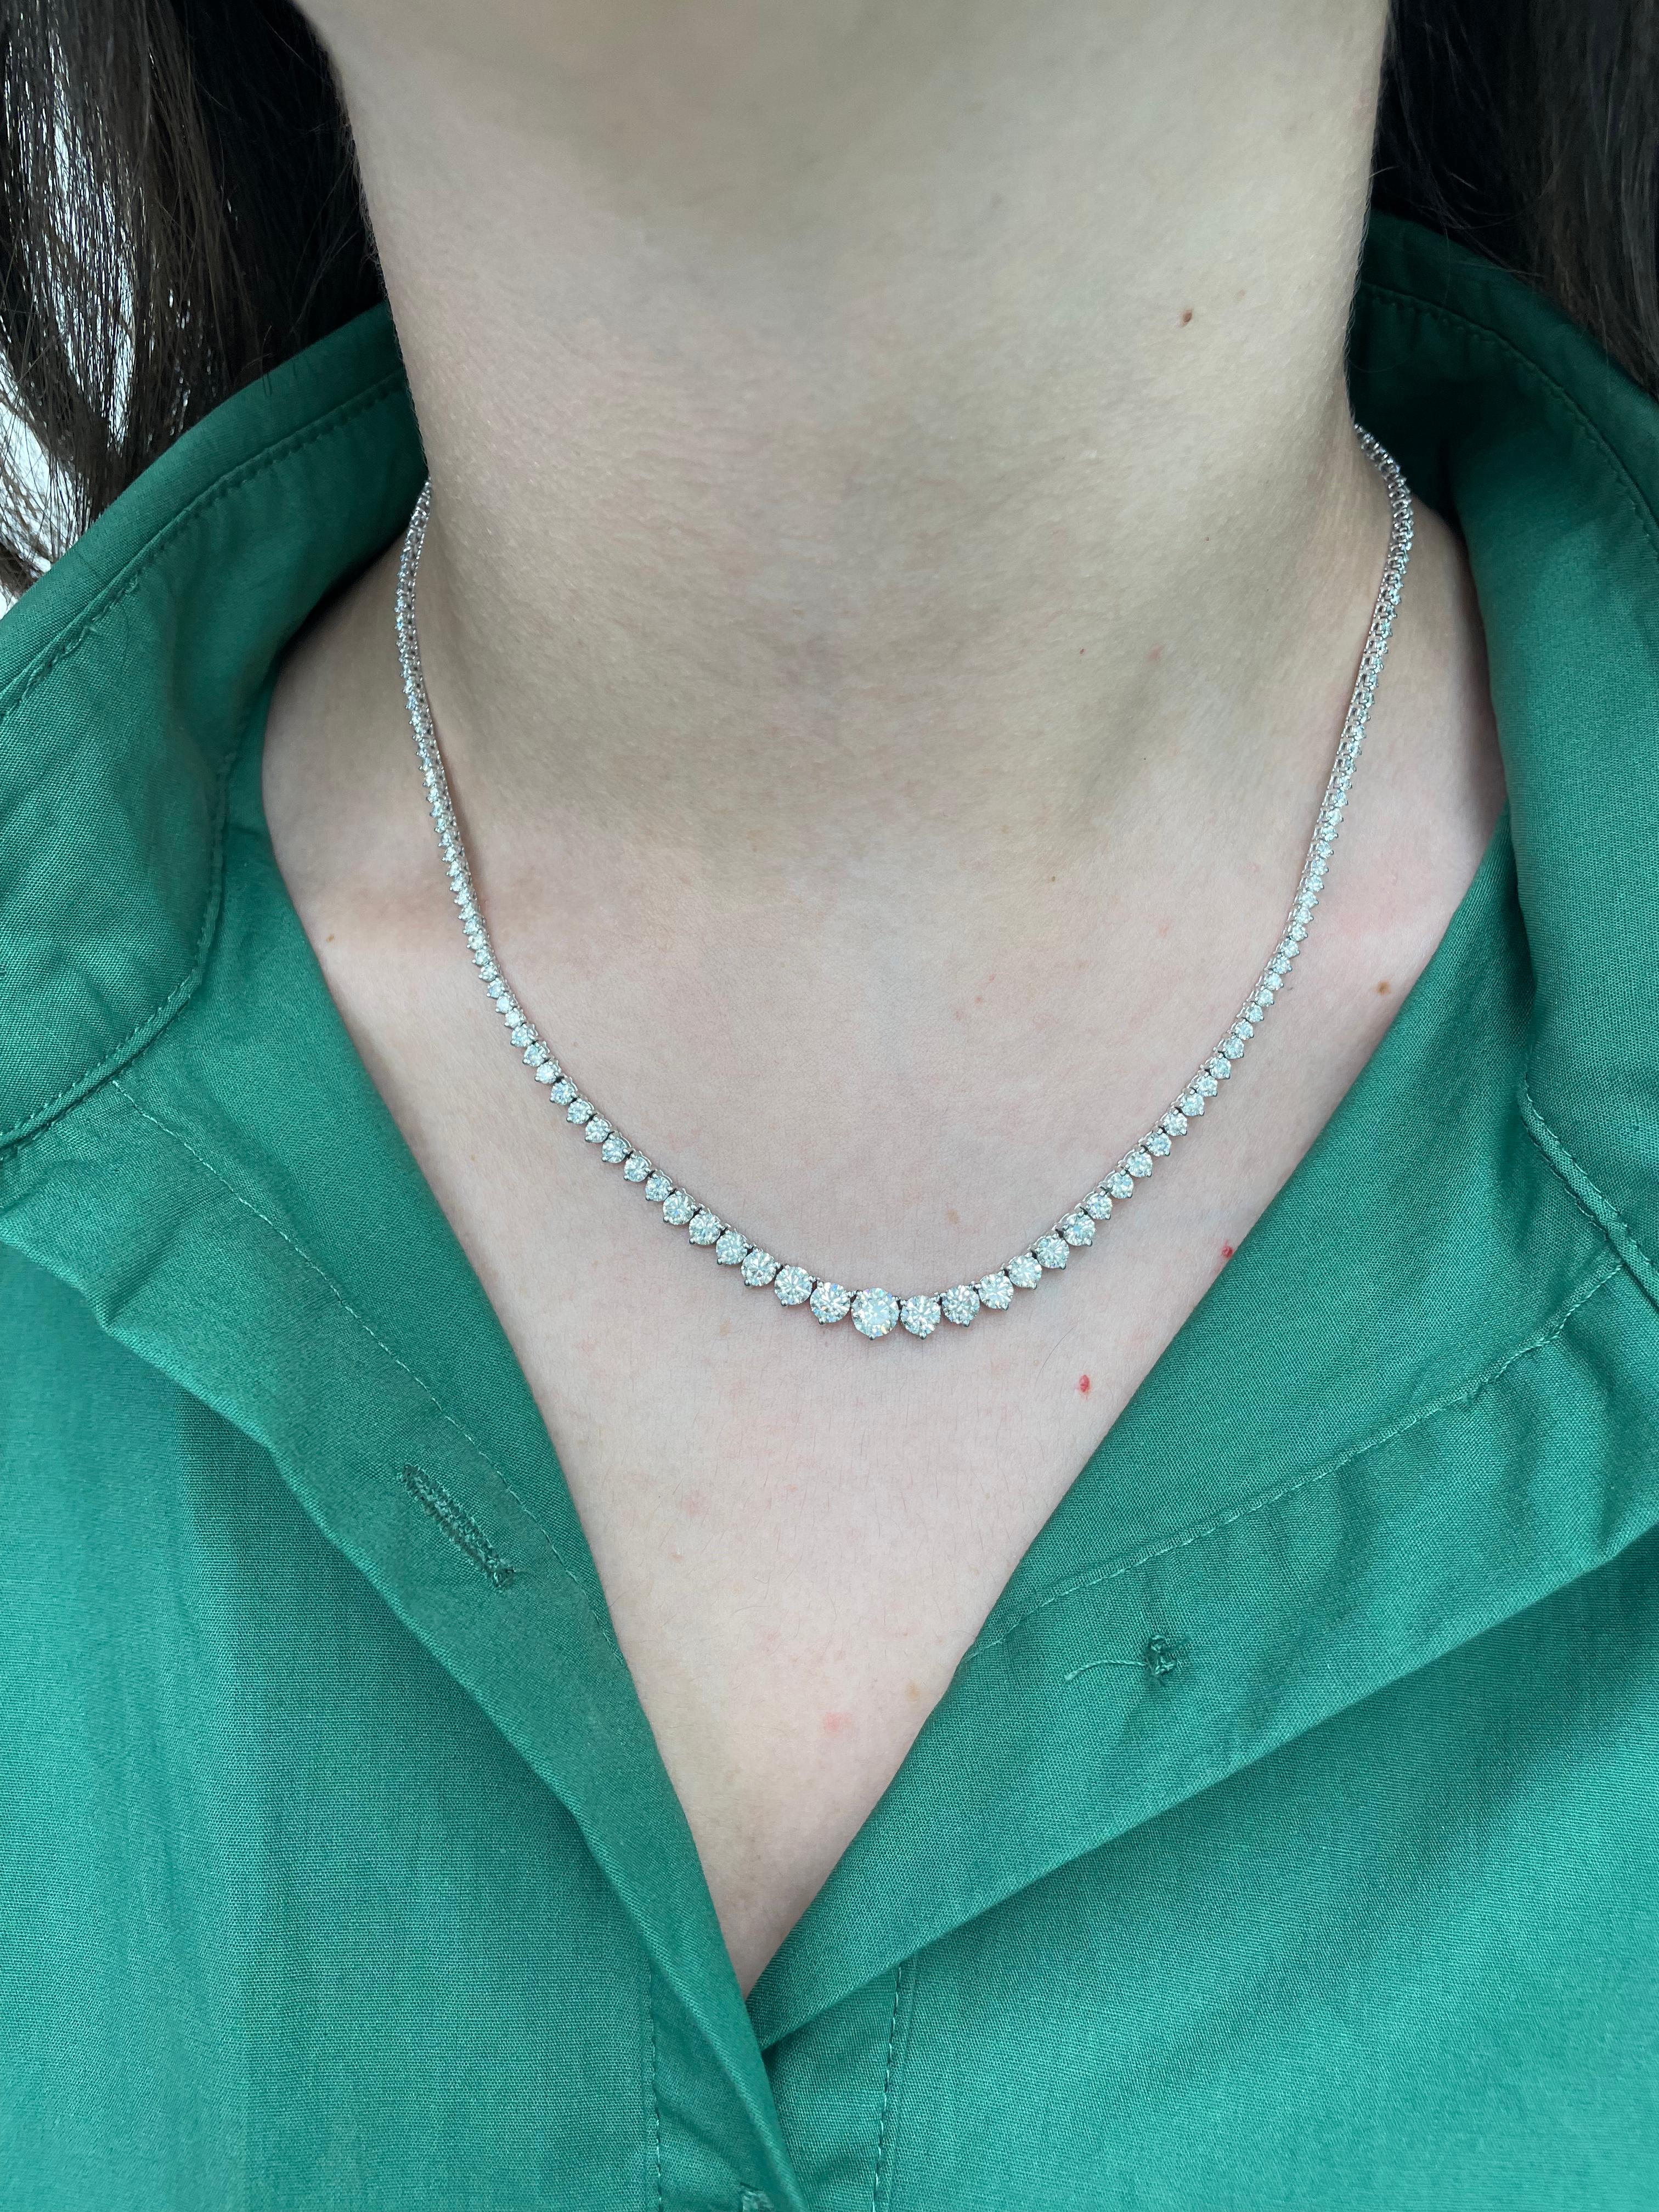 Beautiful and classic diamond tennis riviera necklace, by Alexander Beverly Hills.
10.01 carats of round brilliant diamonds (including center 0.70ct), approximately F/G color and VS2/SI1 clarity. 14k white gold, 14.94 grams, three prong set,